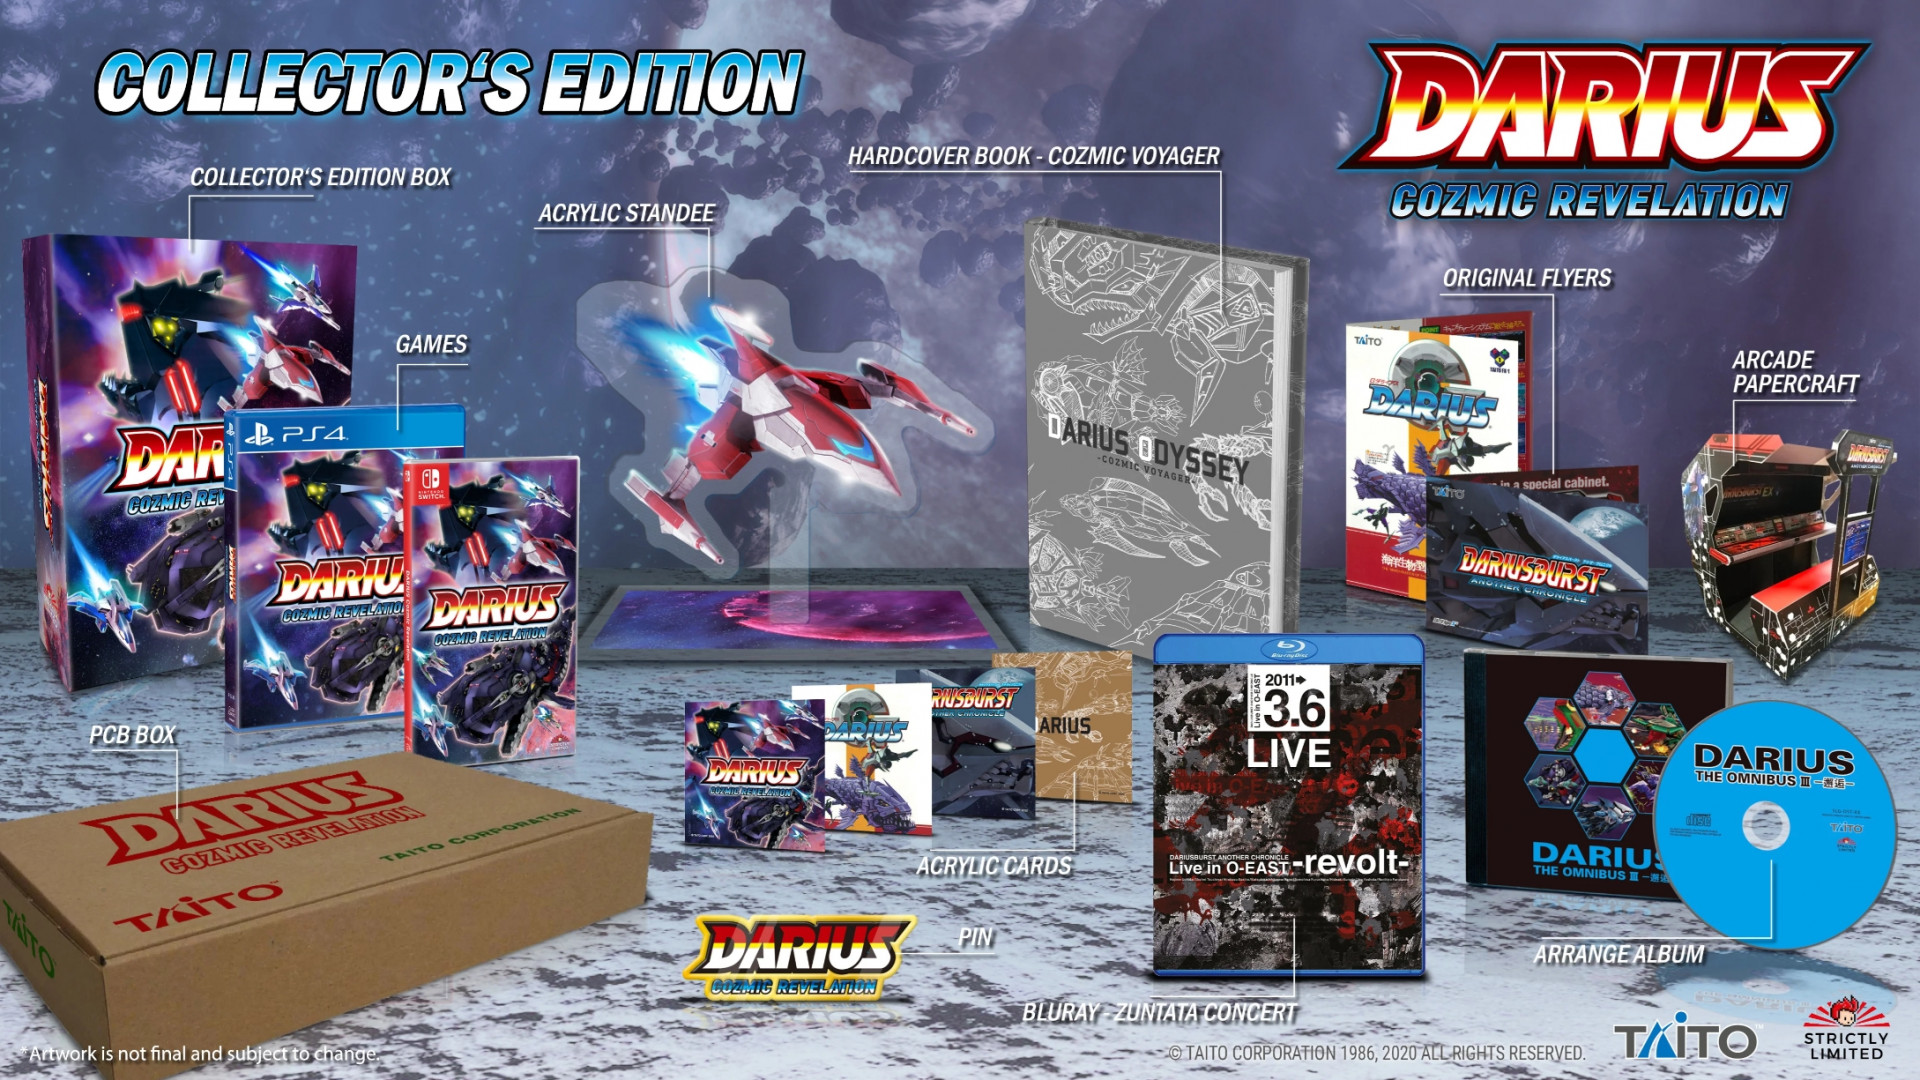 Darius: Cozmic Revelation - Collector's Edition (Strictly Limited) (PS4), Taito Corporation